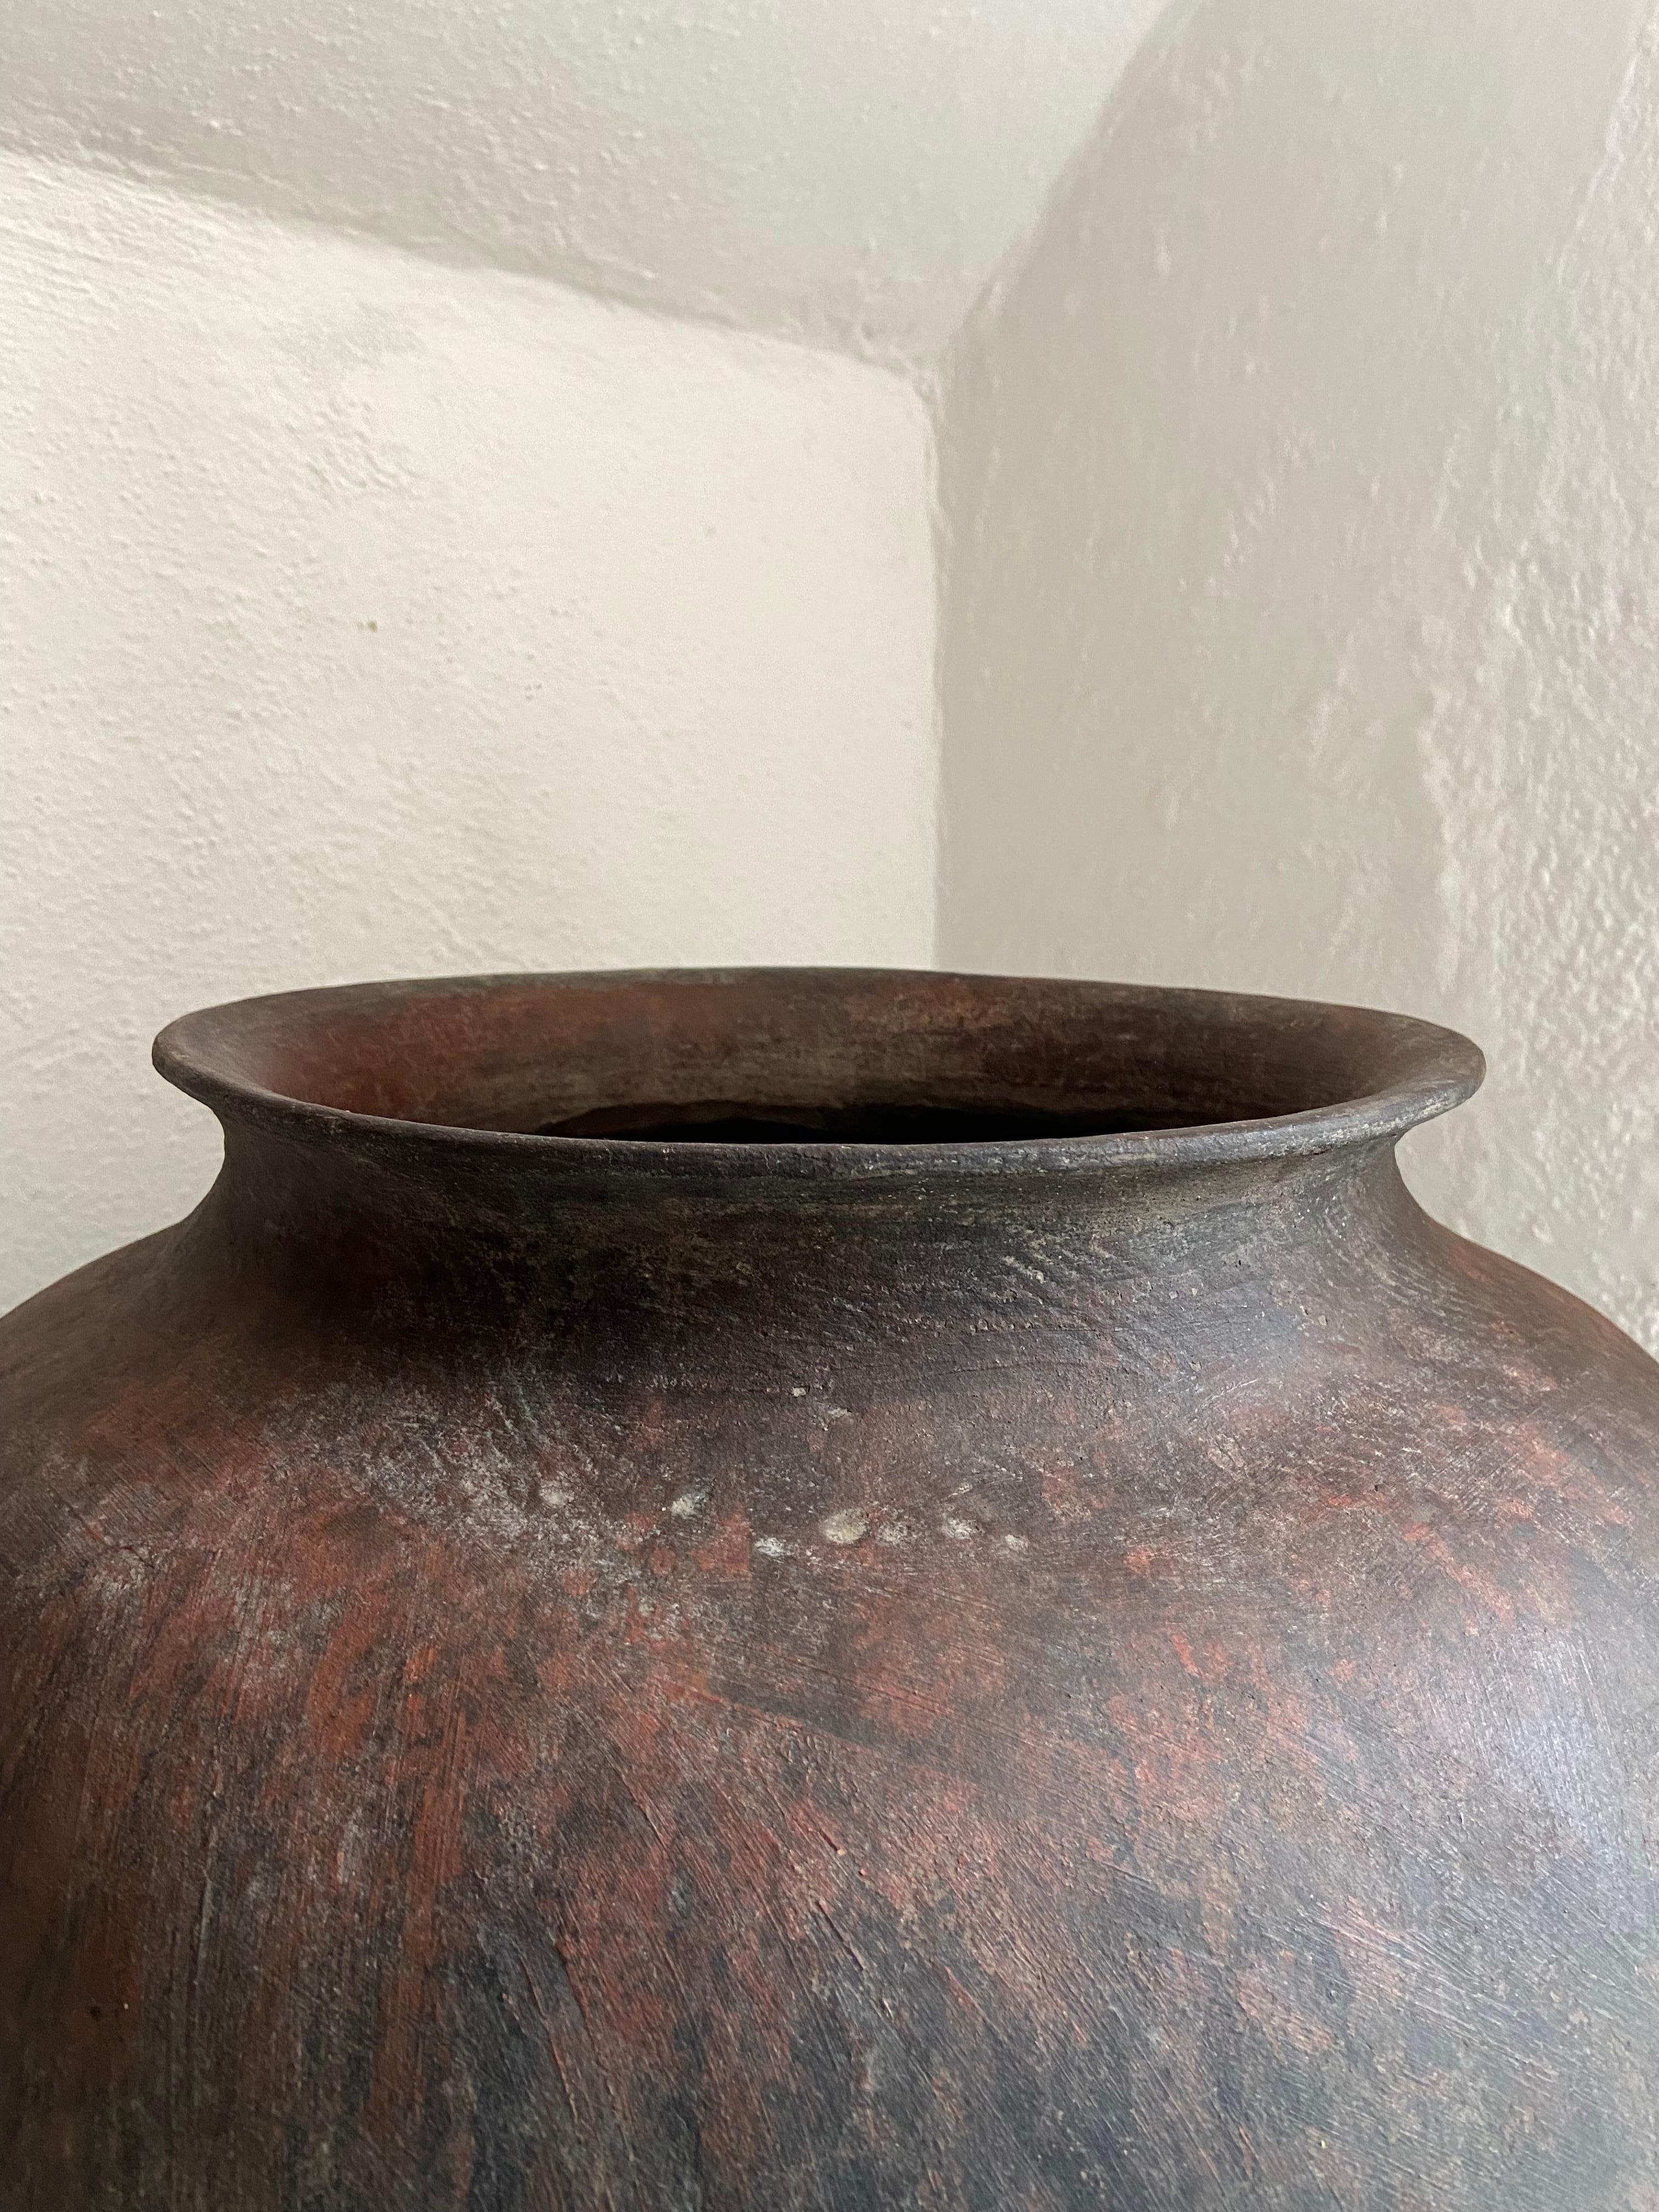 20th century Ceramic pot from the remote sierras of Michoacan. This pot was originally used to store water for household use.